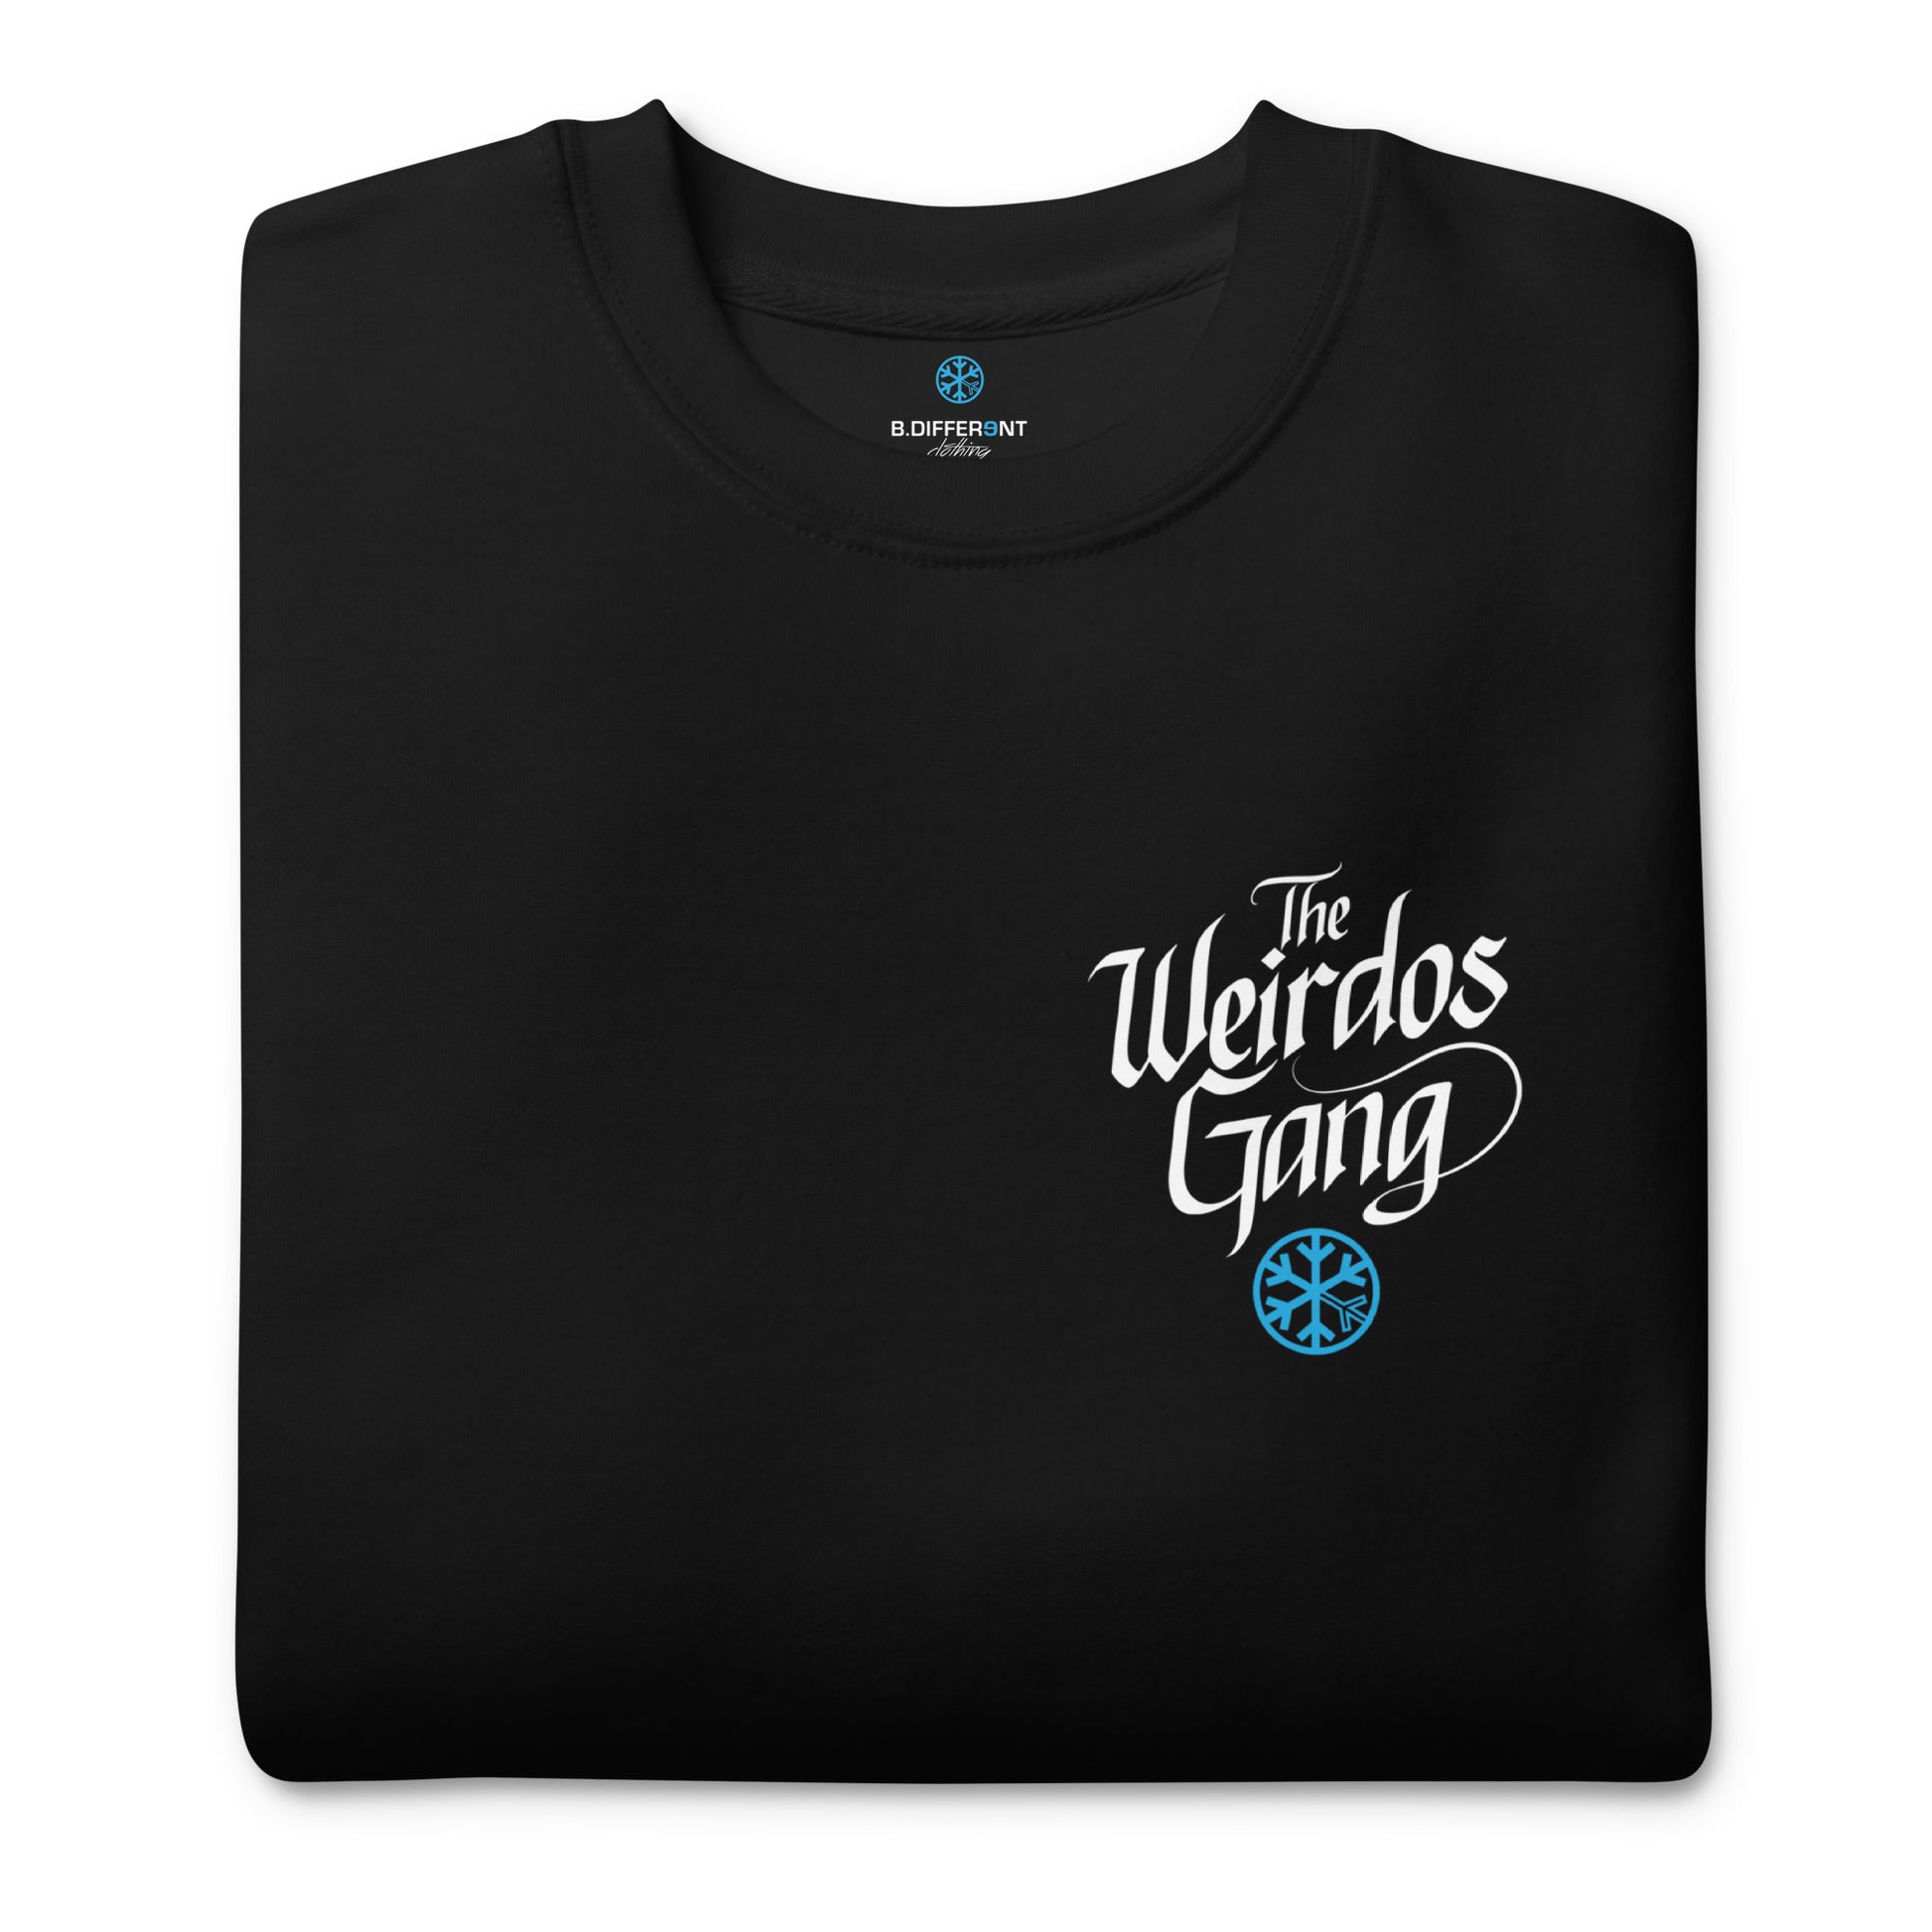 folded back Weirdos gang lettering sweatshirt by B.Different Clothing street art graffiti inspired brand for weirdos, outsiders, and misfits.